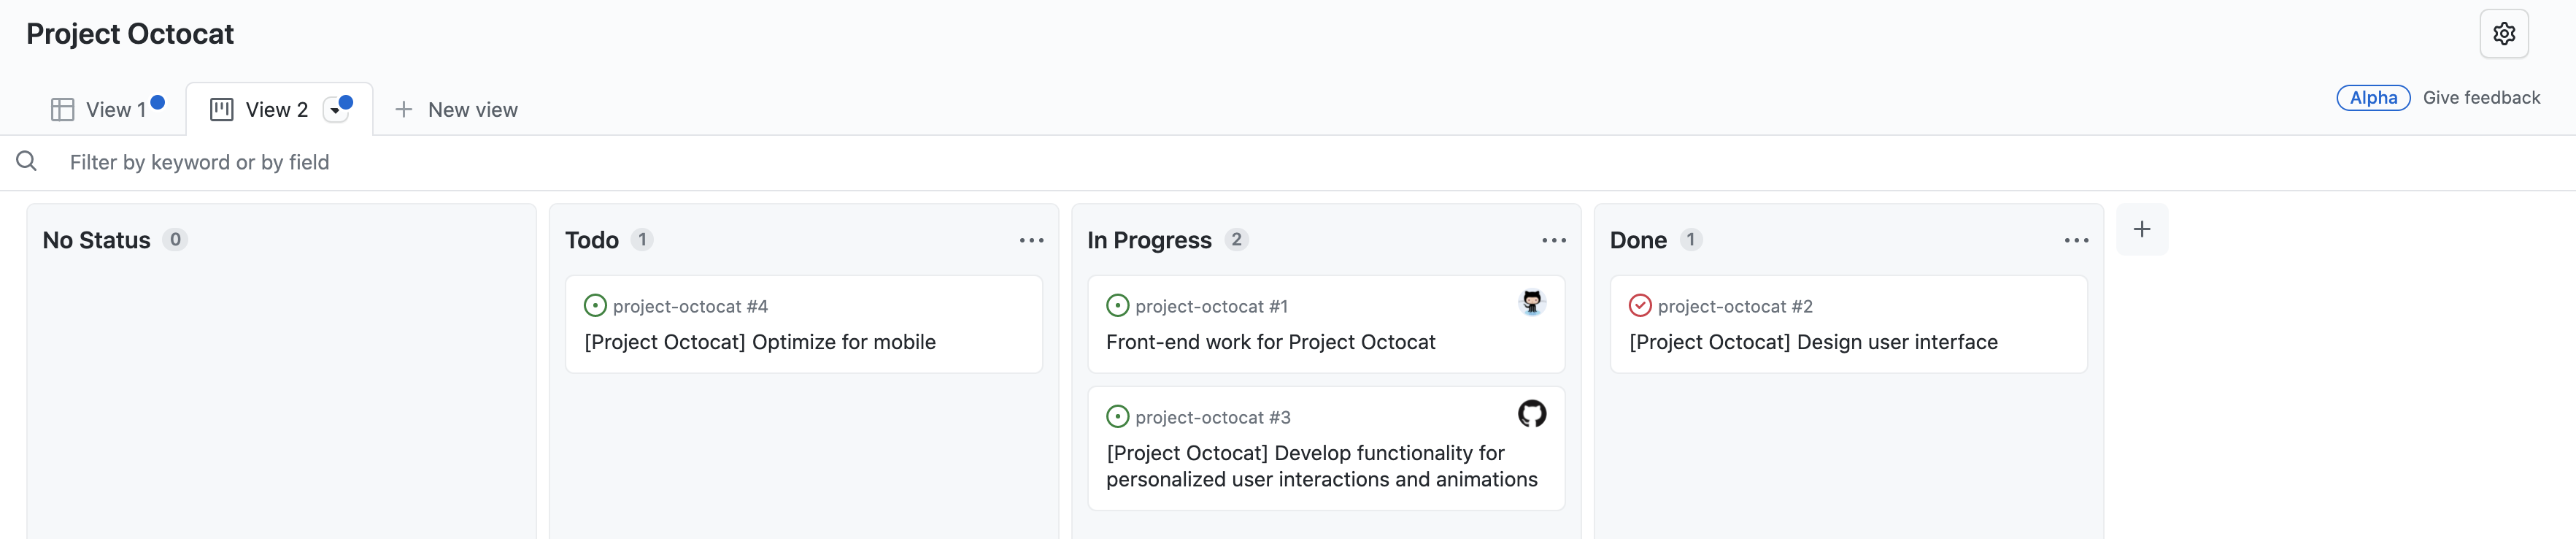 Screenshot of the board view of the "Project Octocat" project, with issues organized into columns for "No Status," "Todo," "In Progress," and "Done."